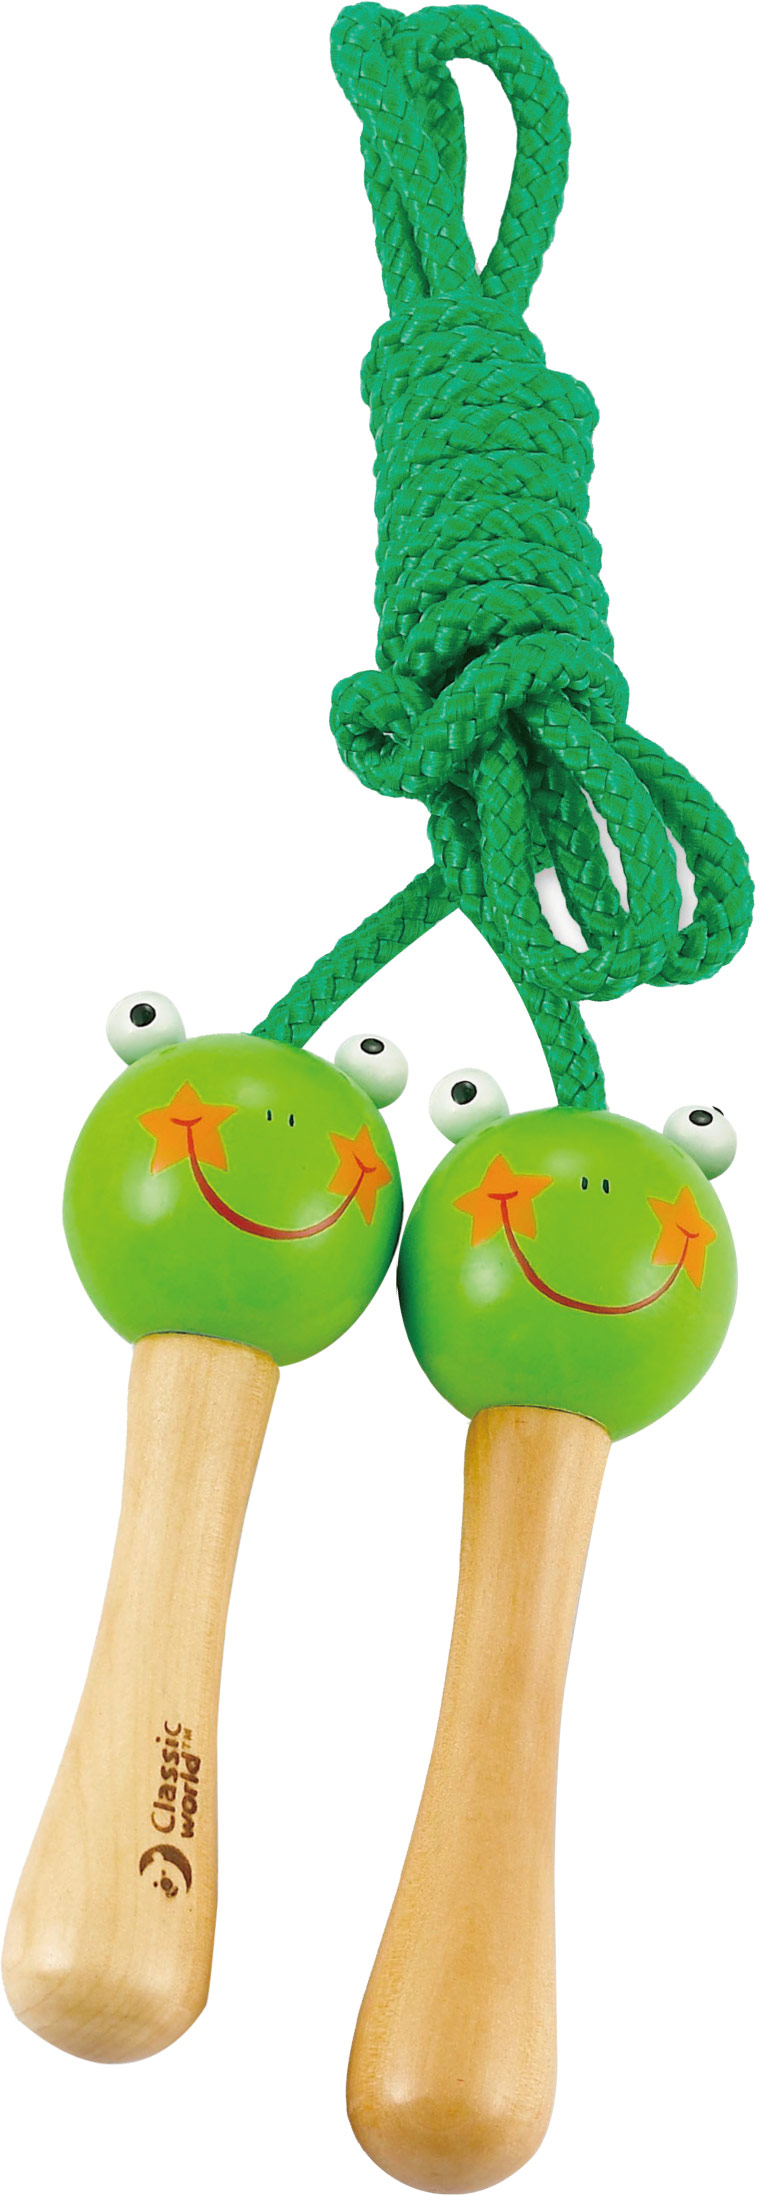 Frog Skipping Rope